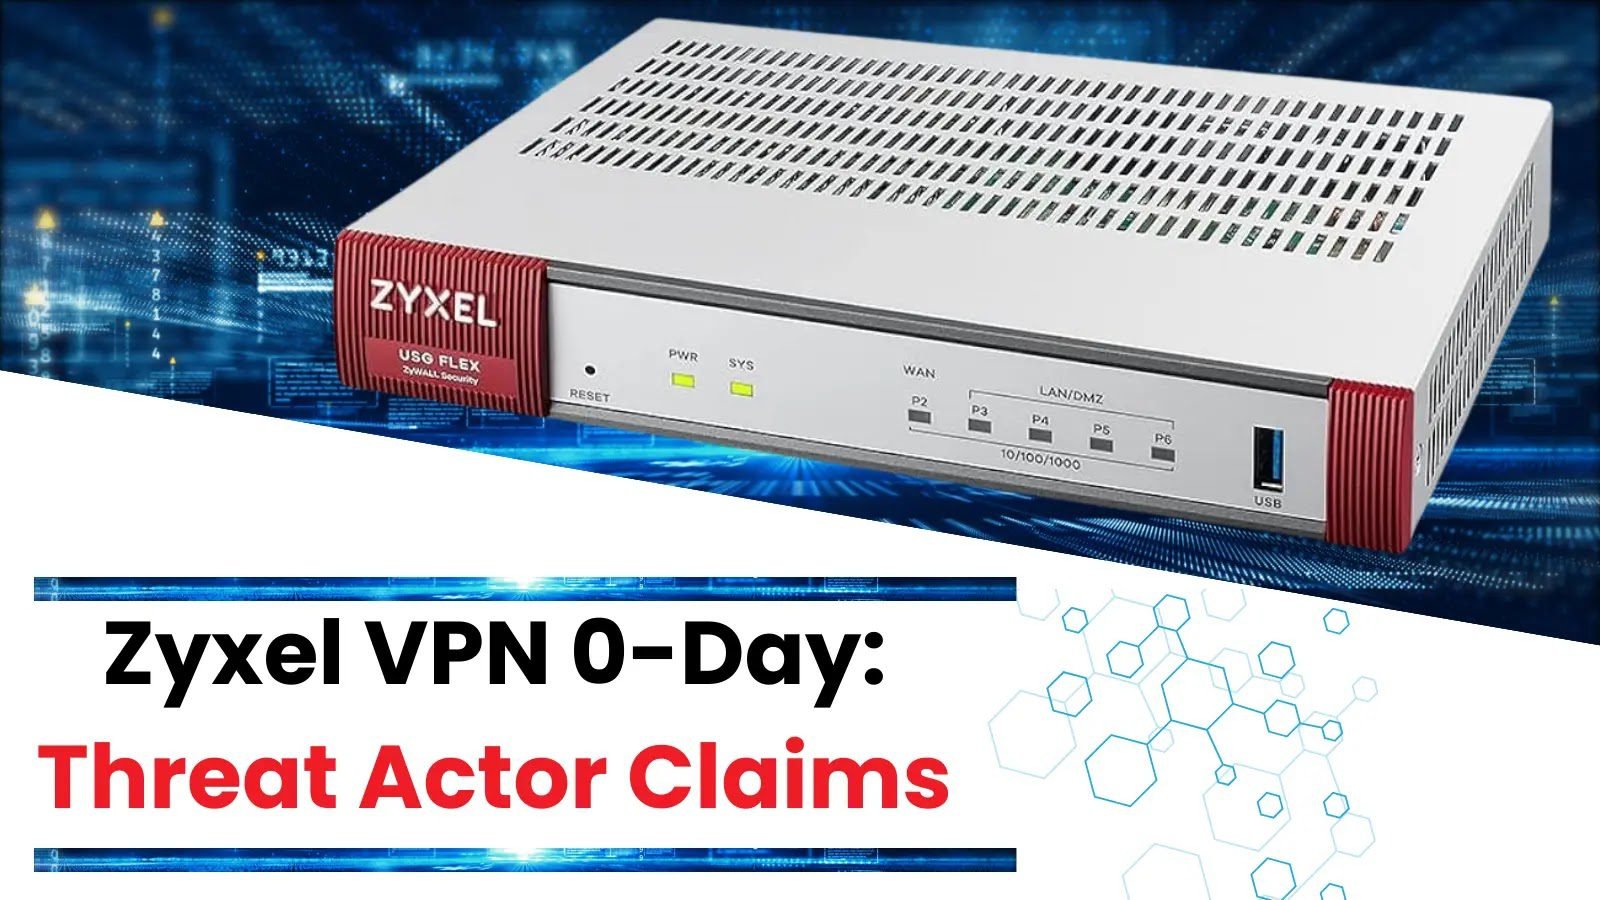 Threat Actors Claiming of 0-Day Vulnerability in Zyxel VPN Device